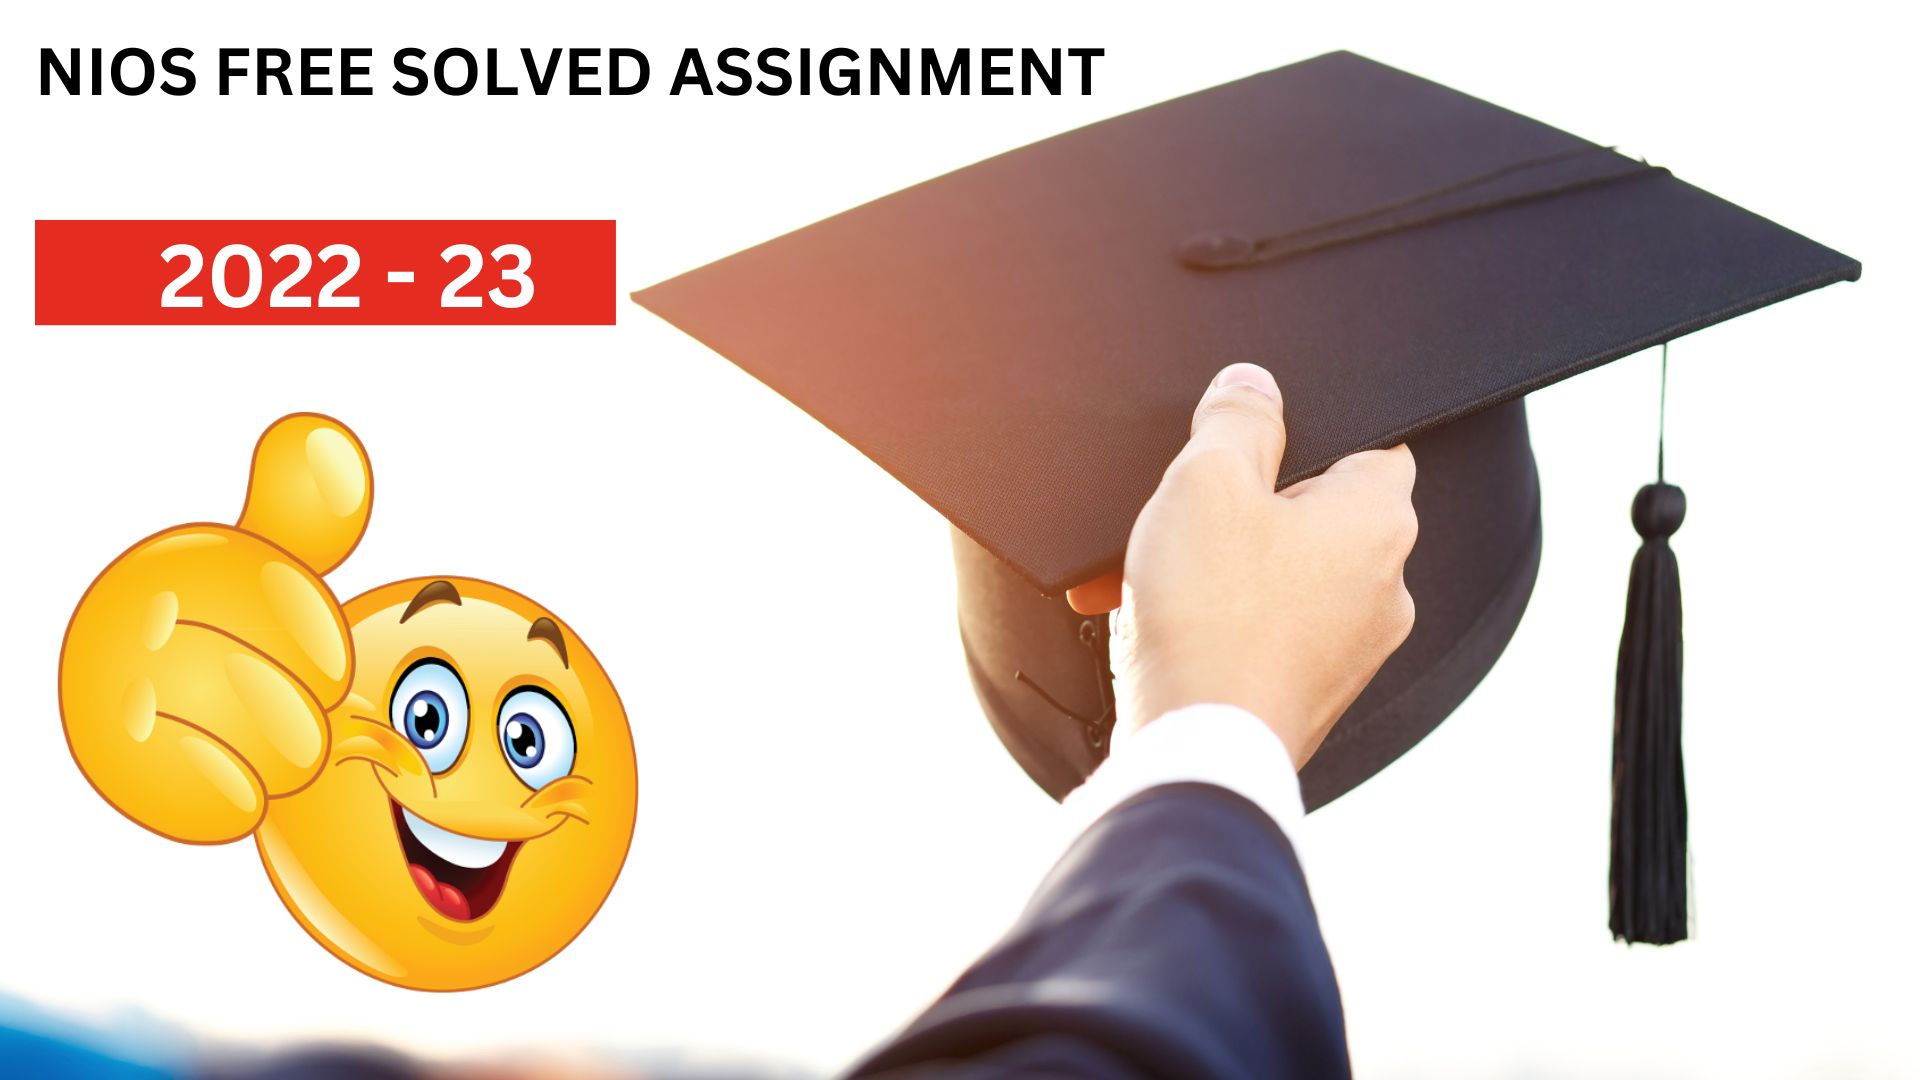 Accoutancy 224 Free Solved Assignment